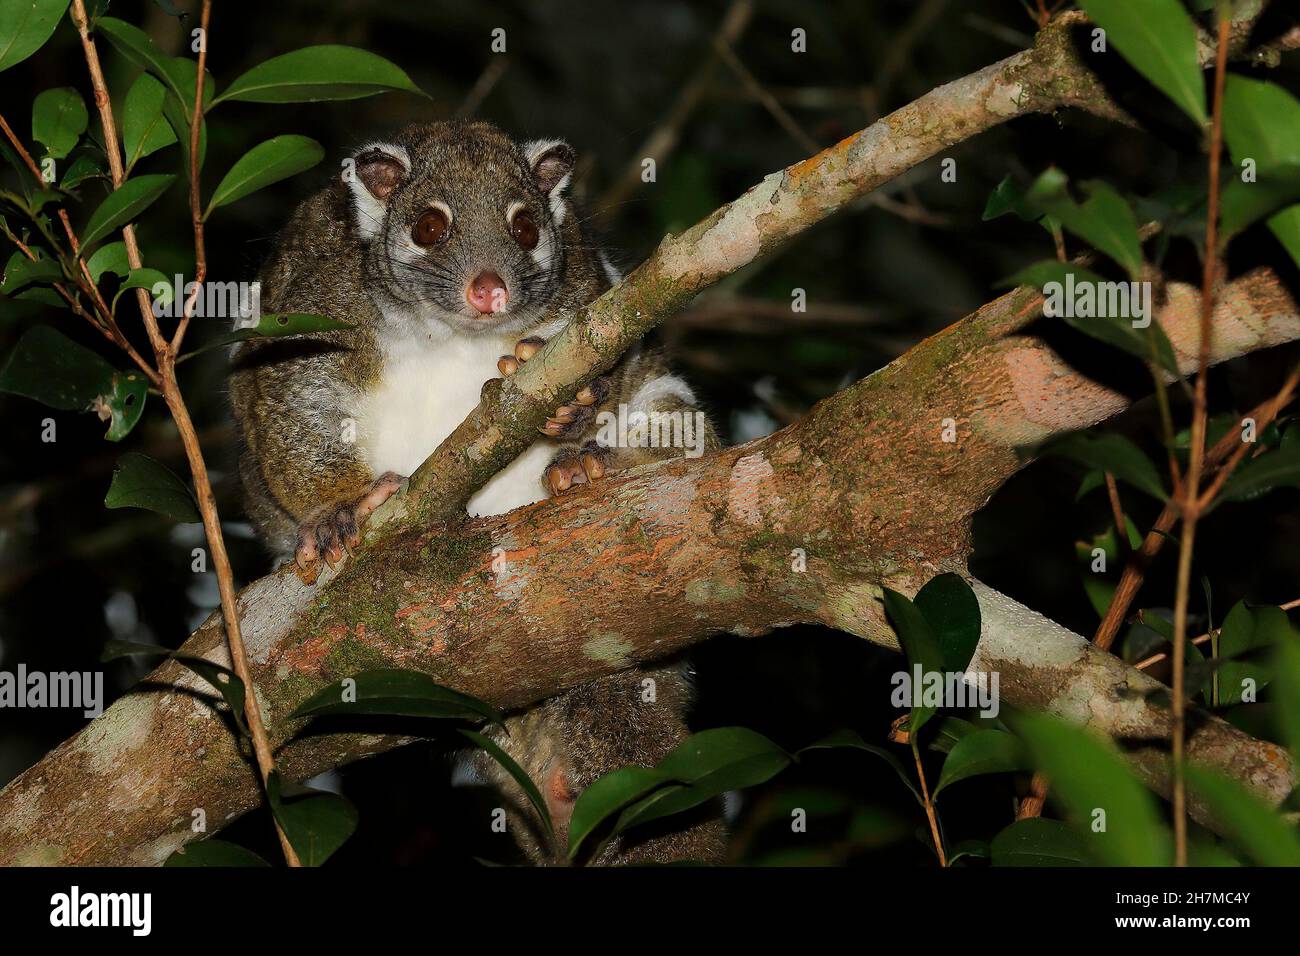 Green ringtail possum (Pseudochirops archeri) in a tree at night, showing the small white patches below the big eyes and small ears. It seldom comes t Stock Photo